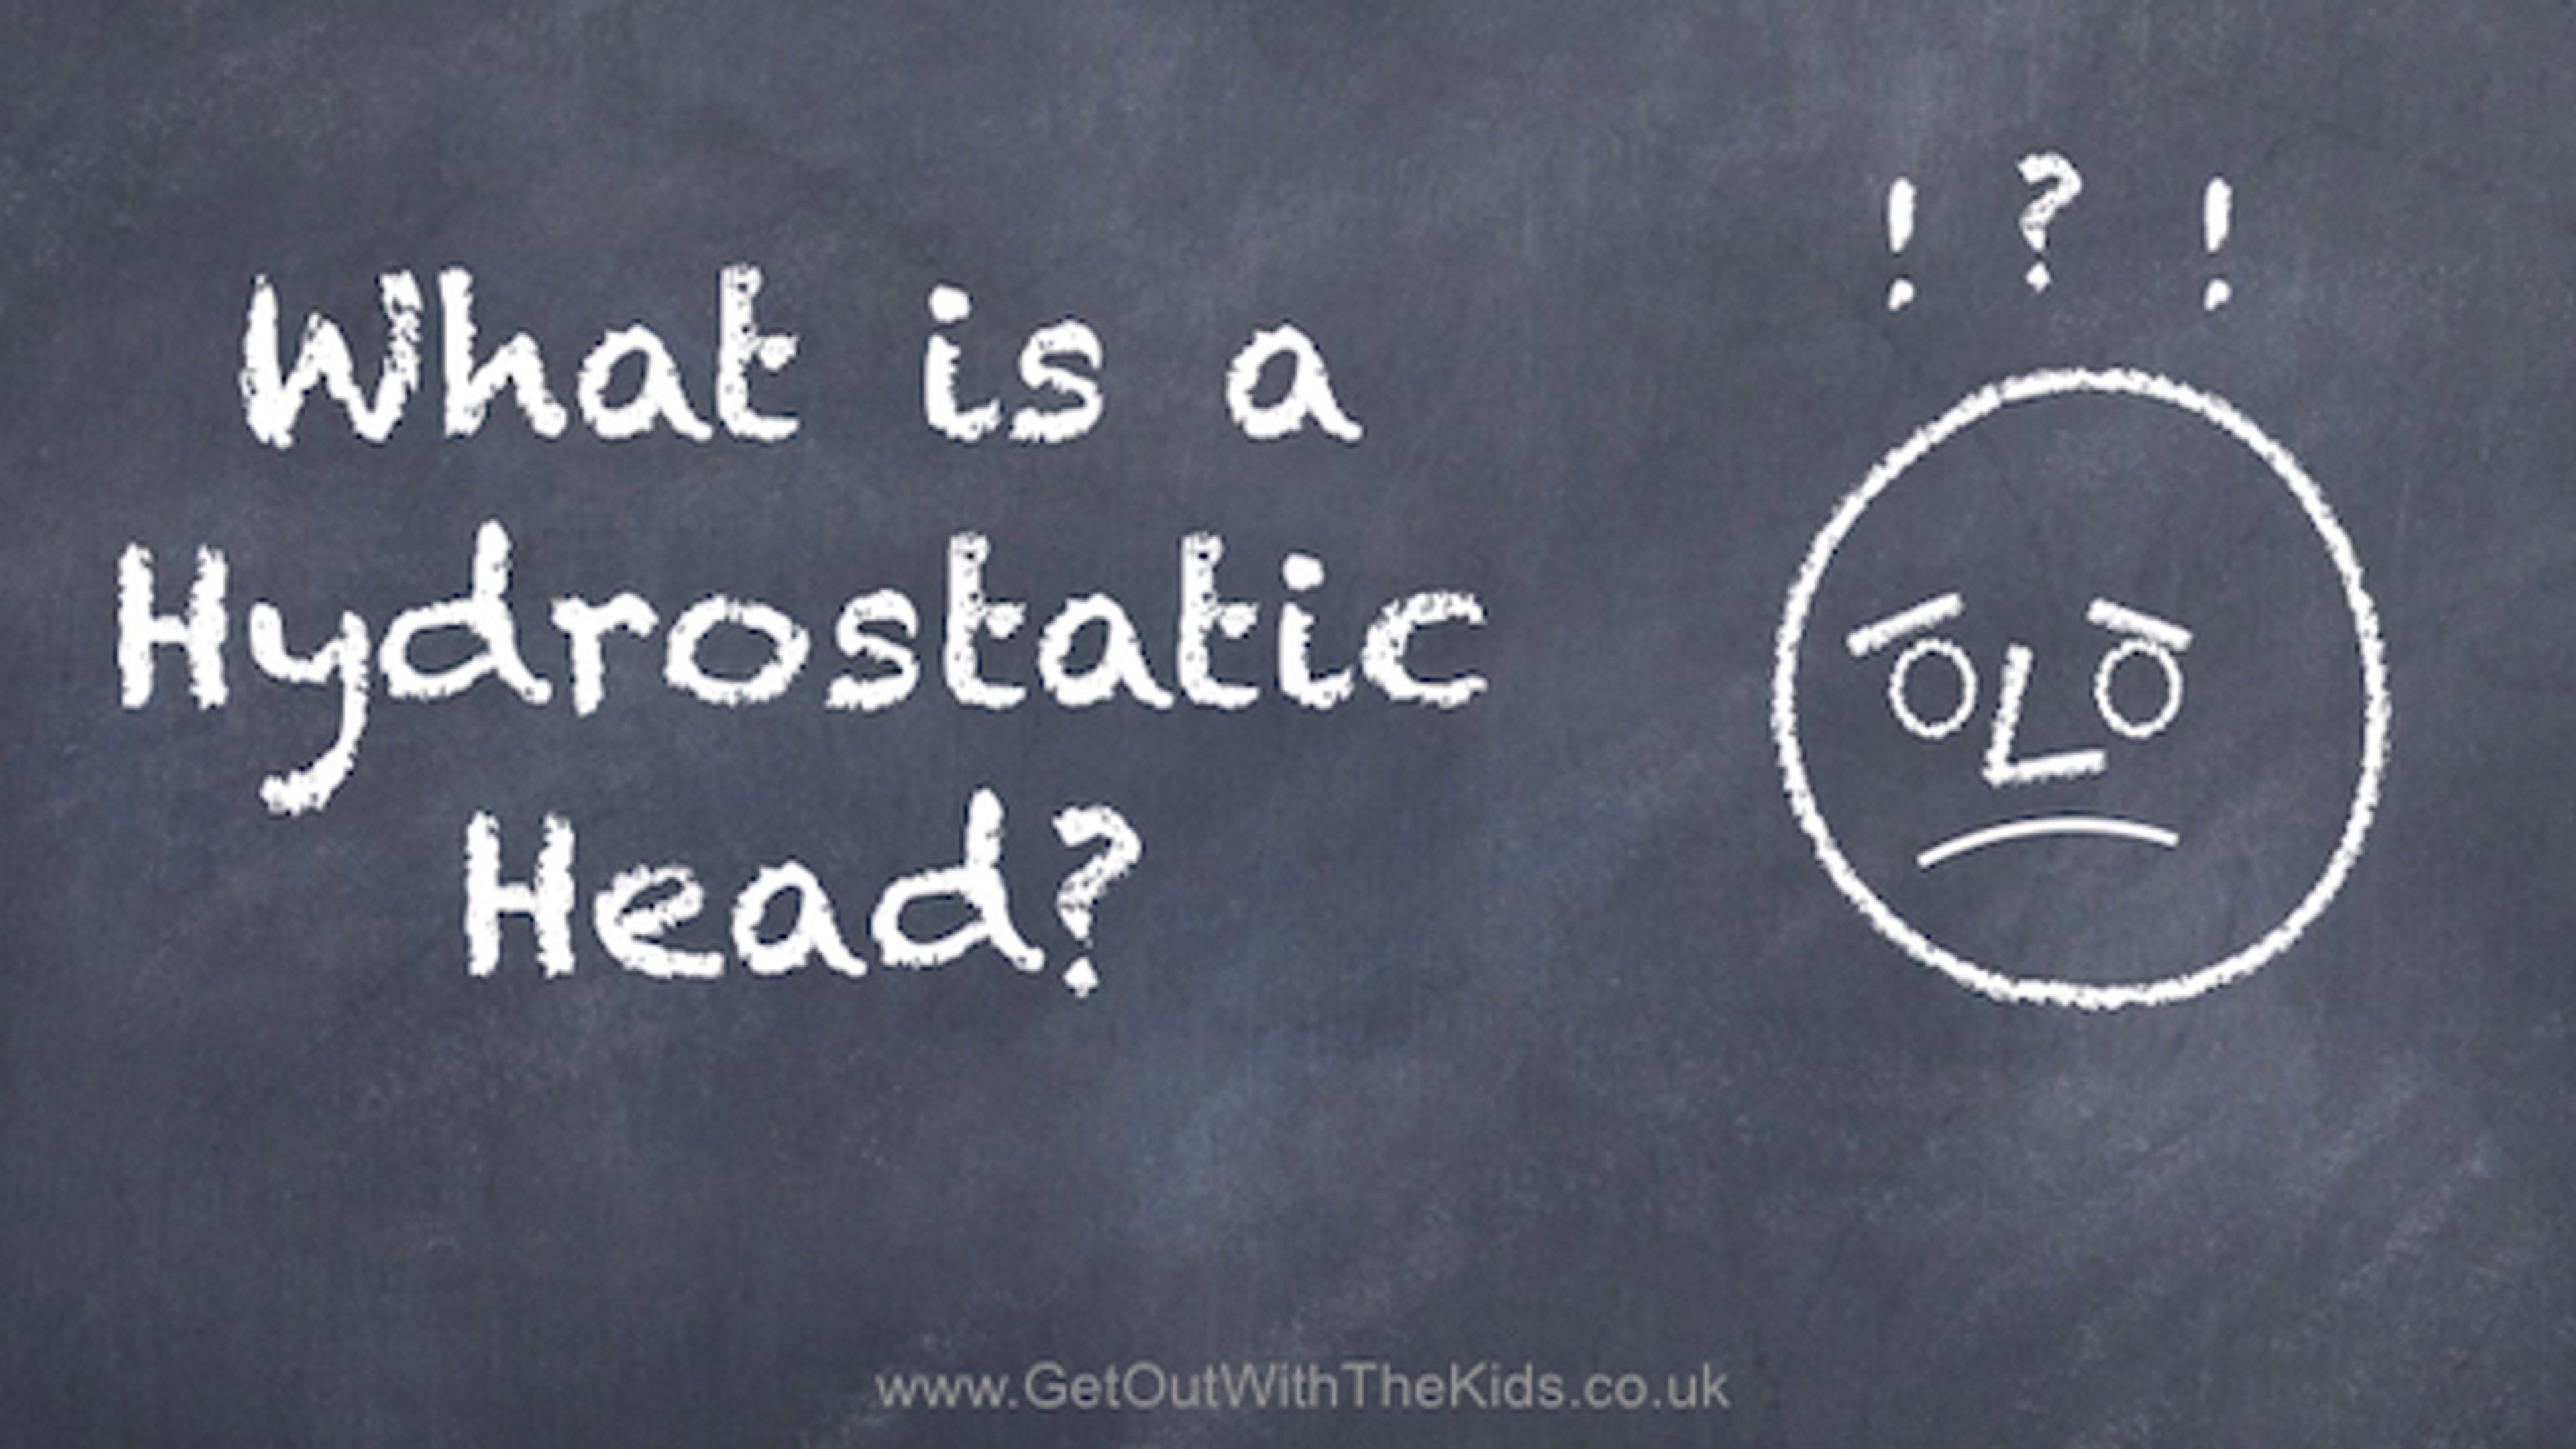 What is Hydrostatic Head?